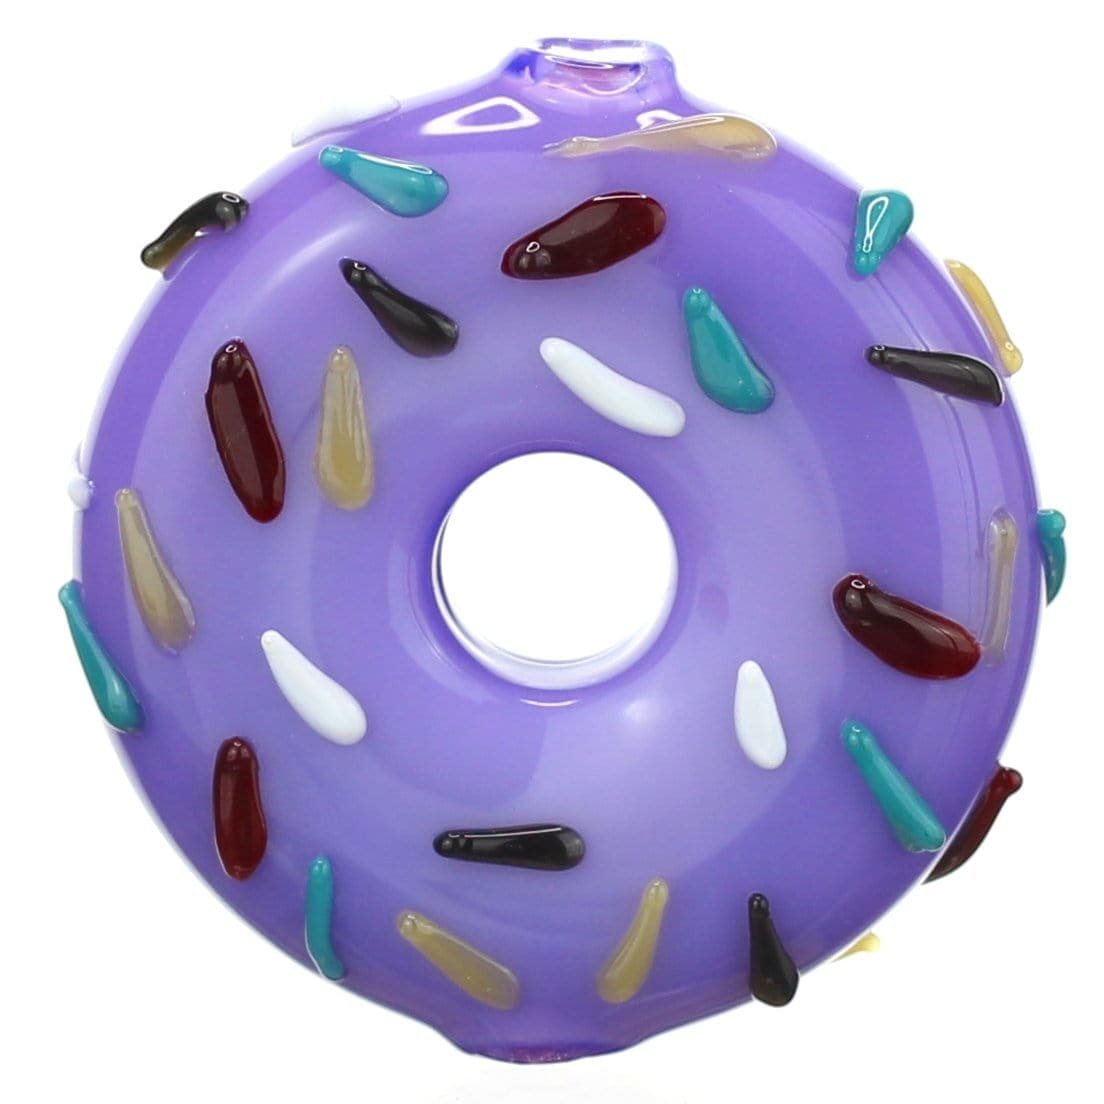 Daily High Club Glass Purple Frosting With Sprinkles Daily High Club "Donut" Blunt/Joint Holder + Pendant